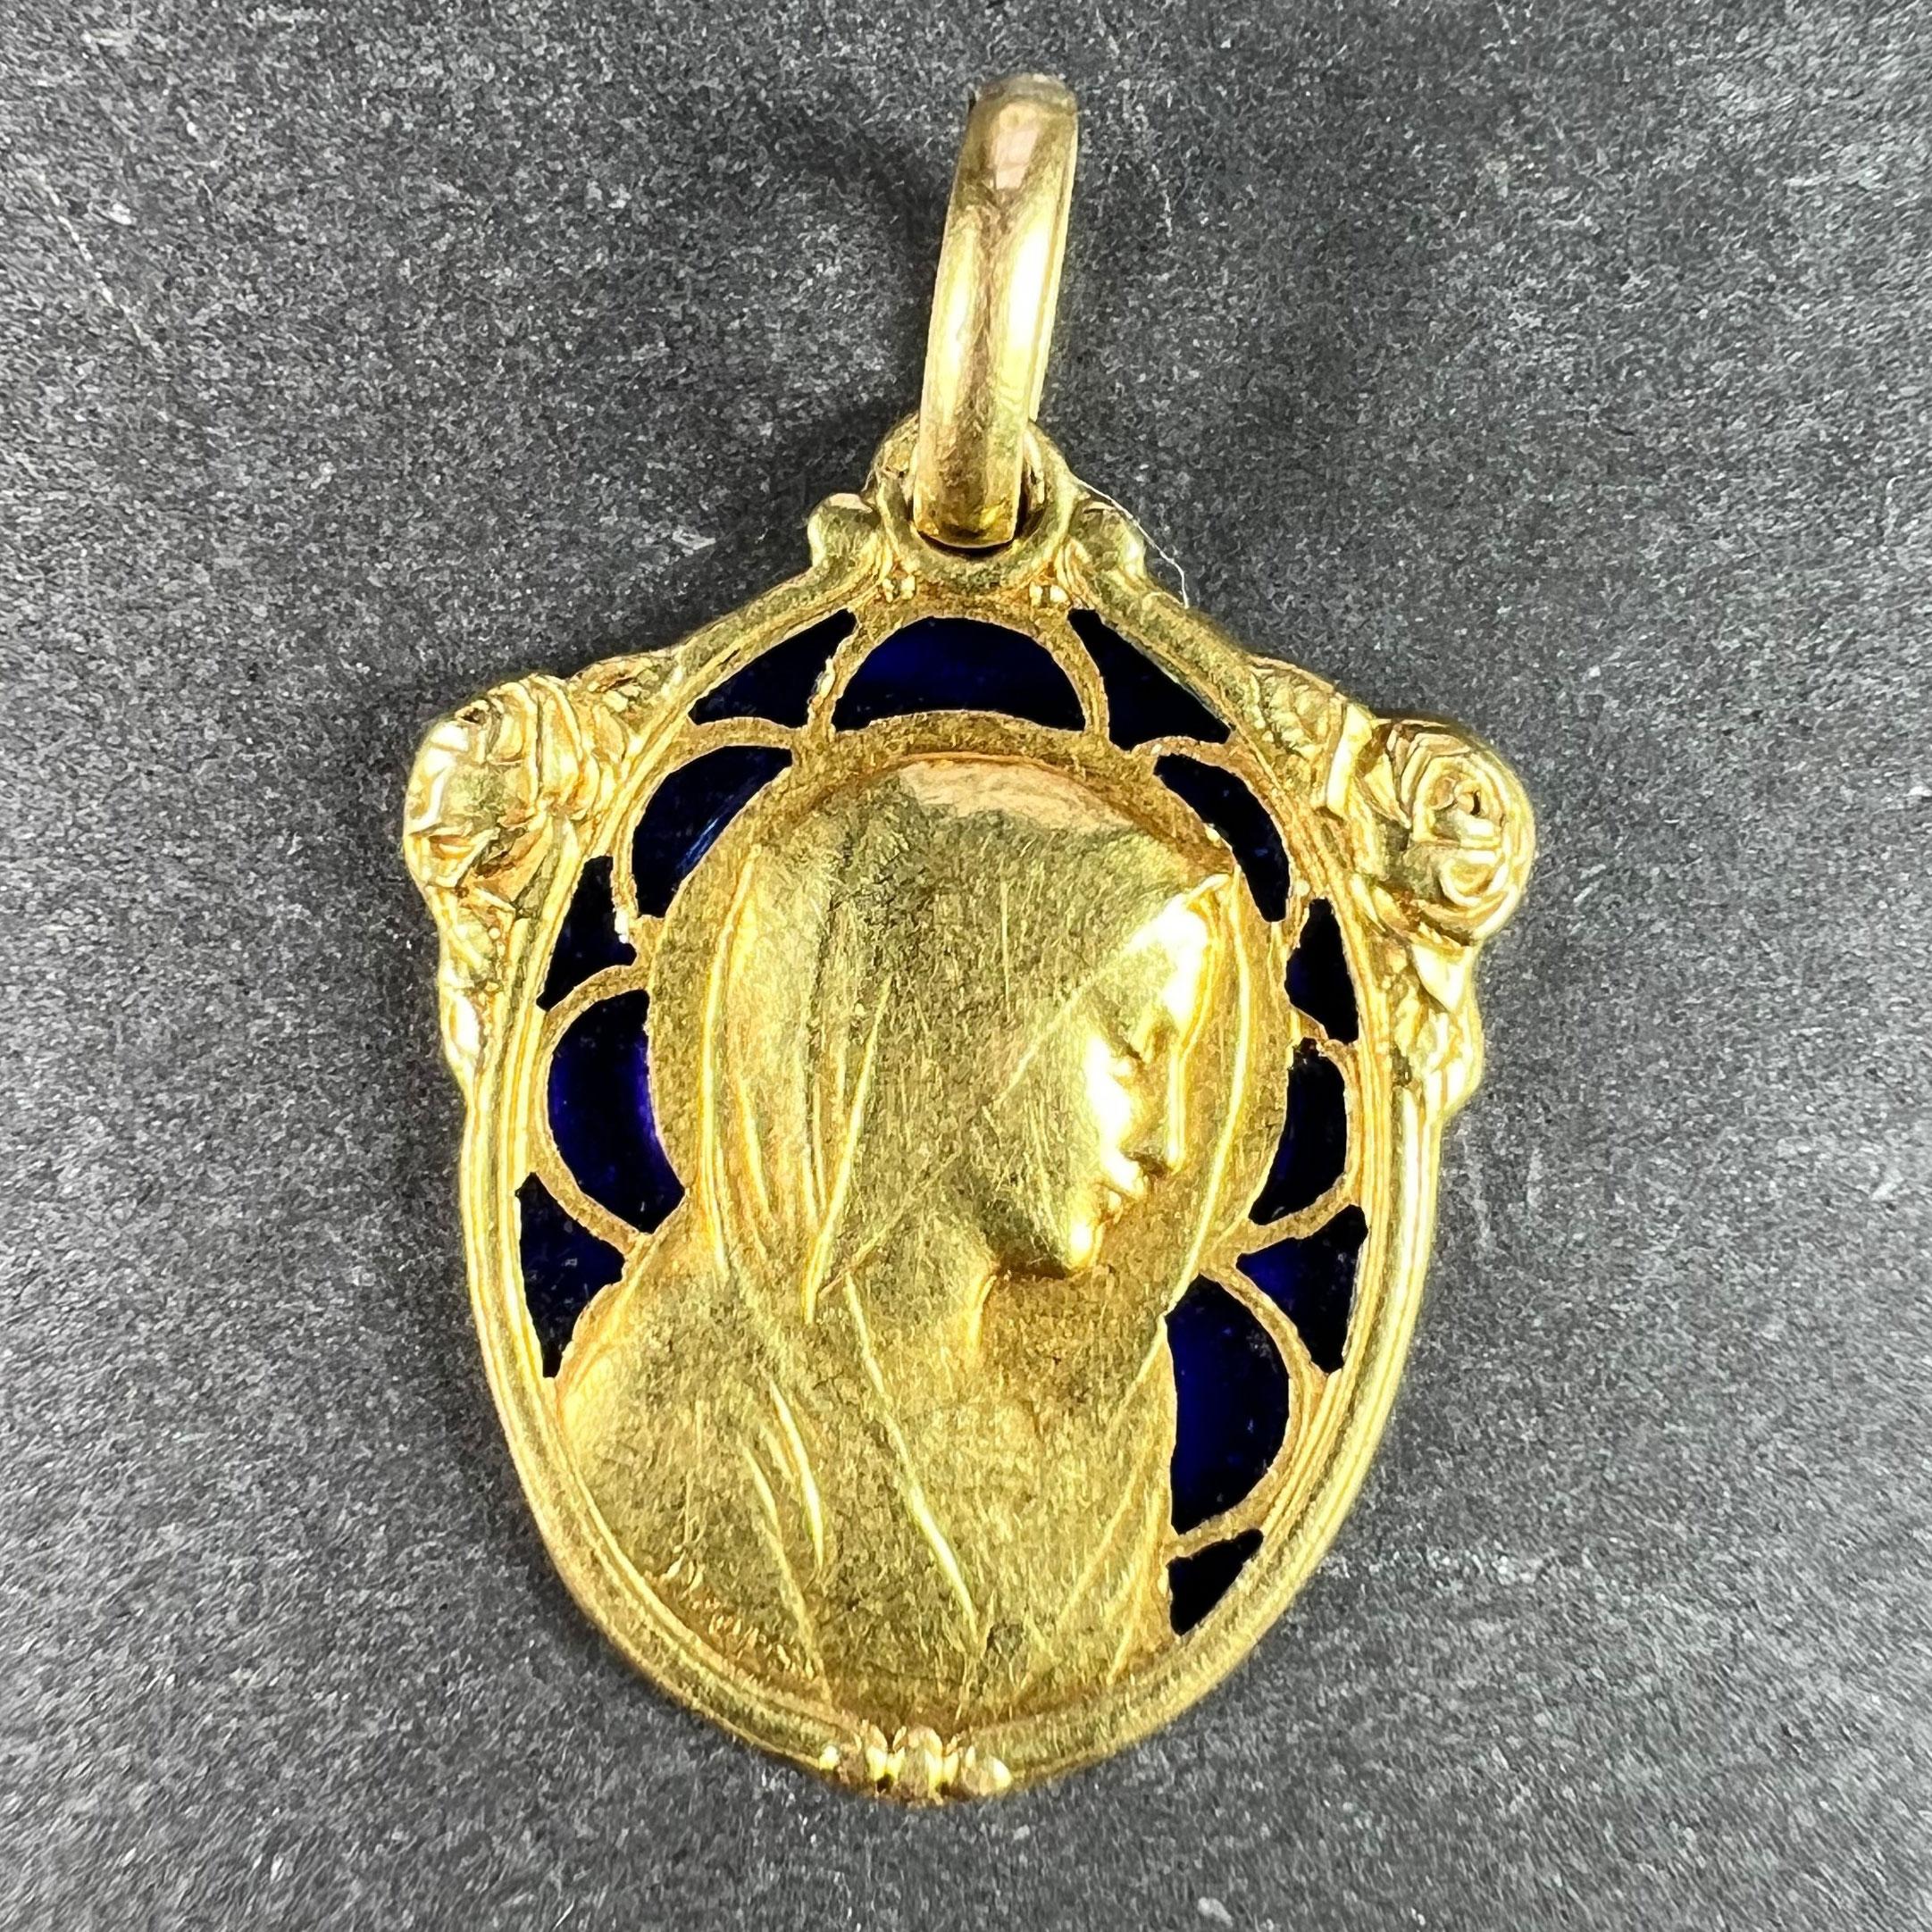 A French 18 karat (18K) yellow gold charm pendant set with plique a jour blue enamel designed as the Virgin Mary with a motif of roses. Signed Dropsy. Engraved to the reverse with a monogram for MB and the date 21 Mai 1933. Stamped with the eagle